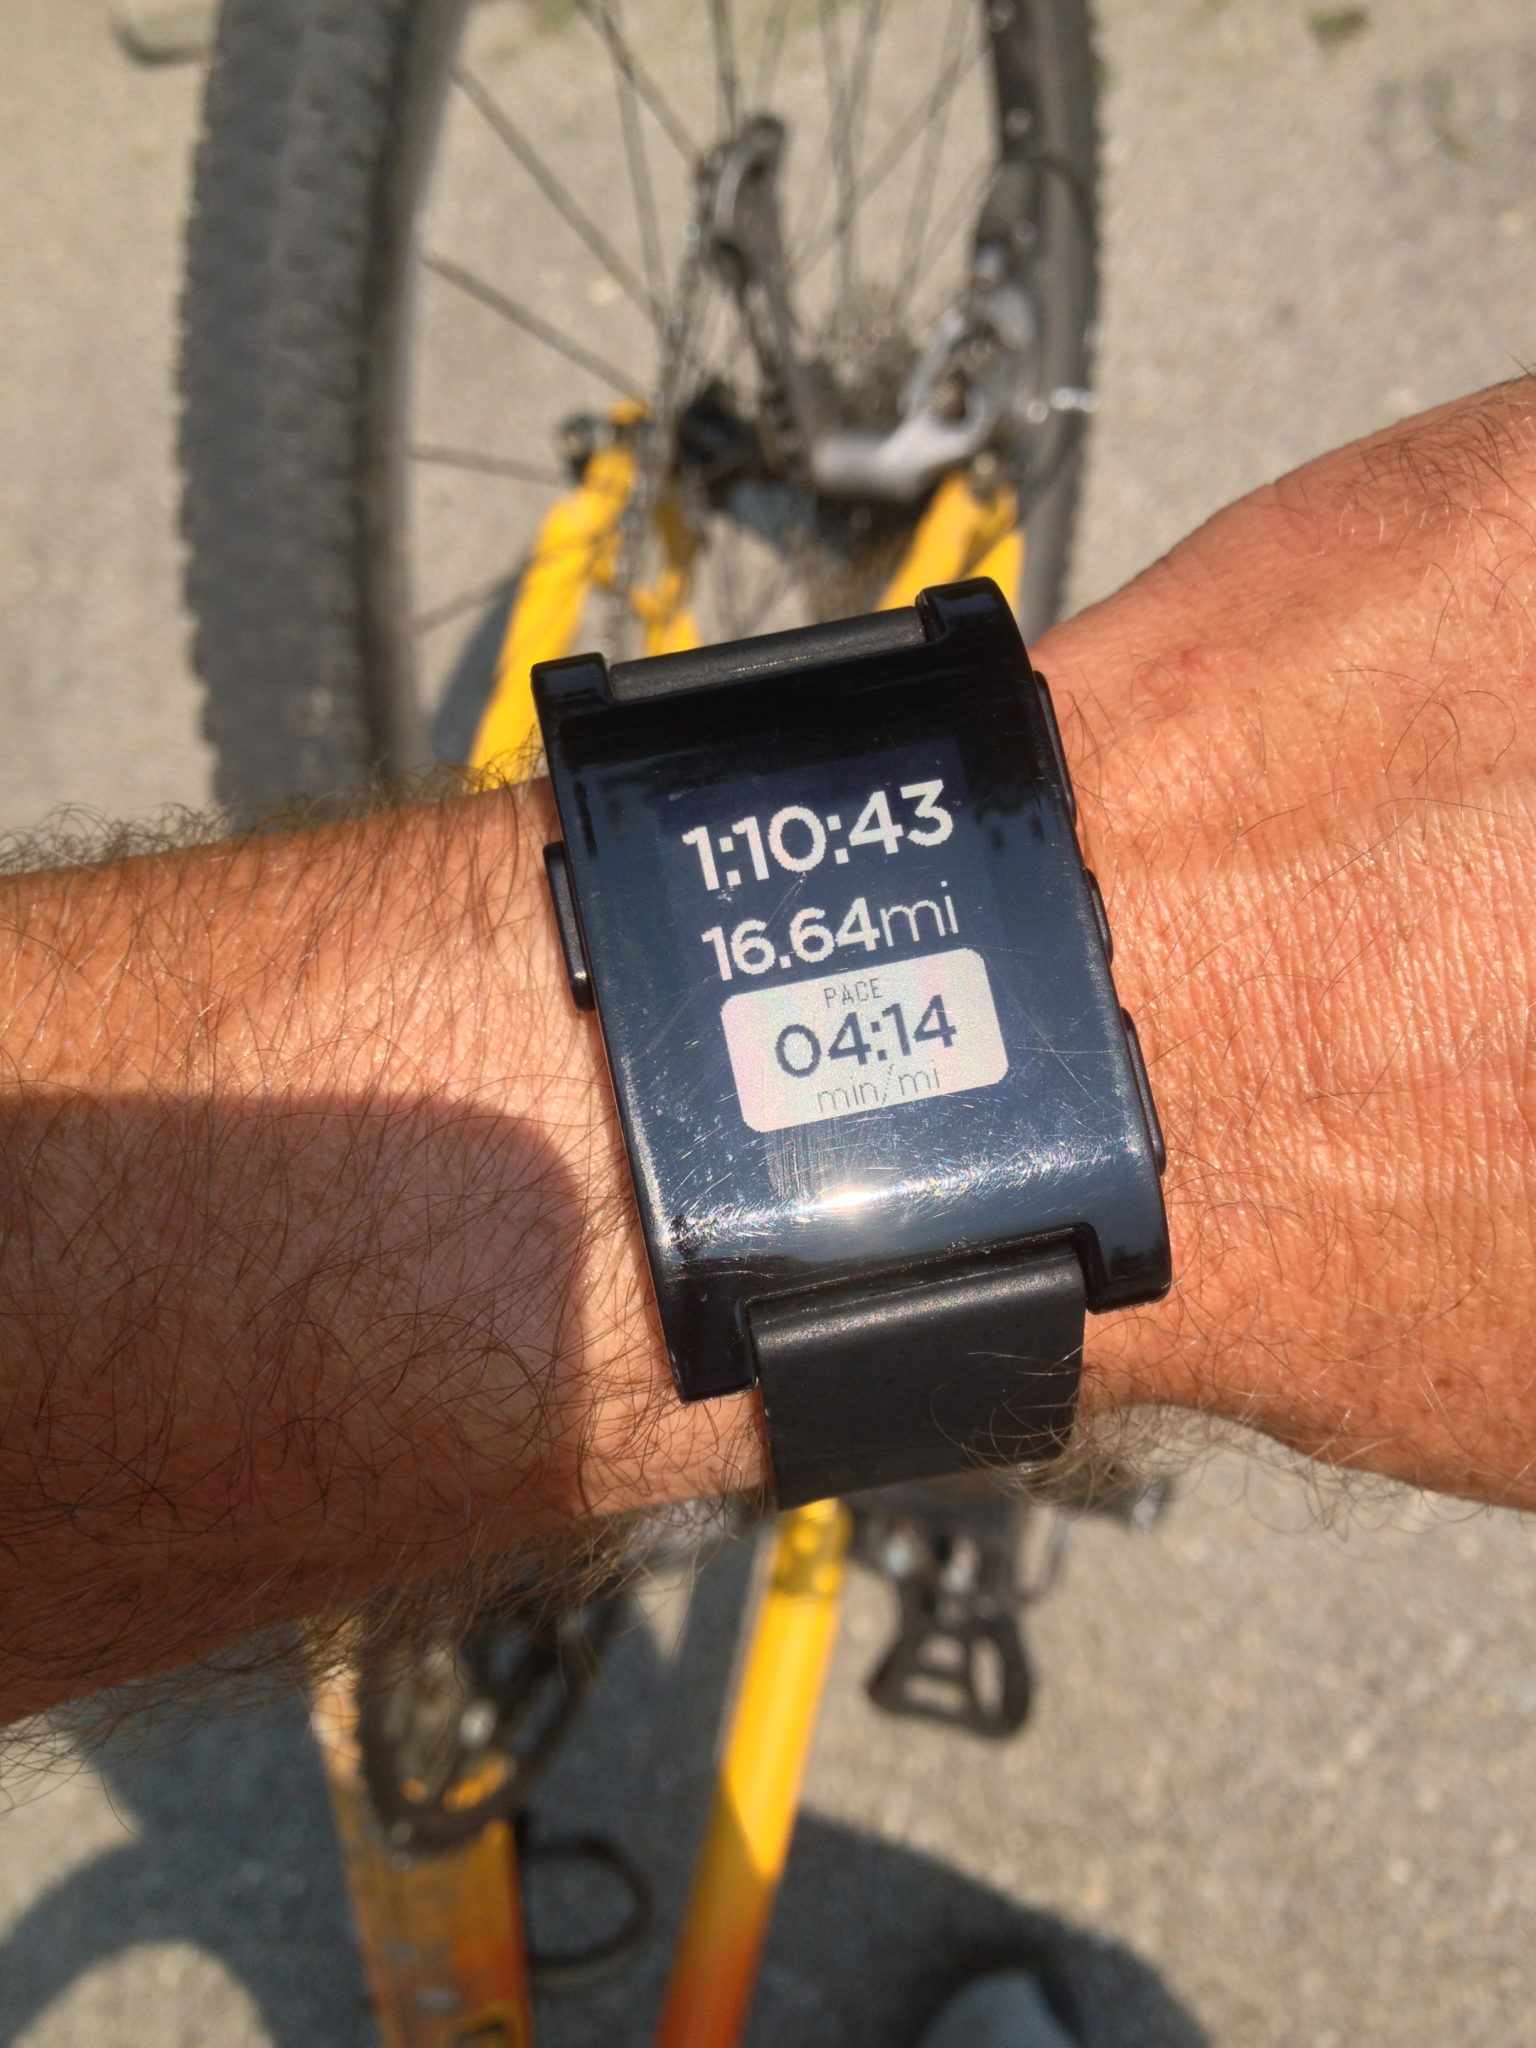 Pebble on a bicycle